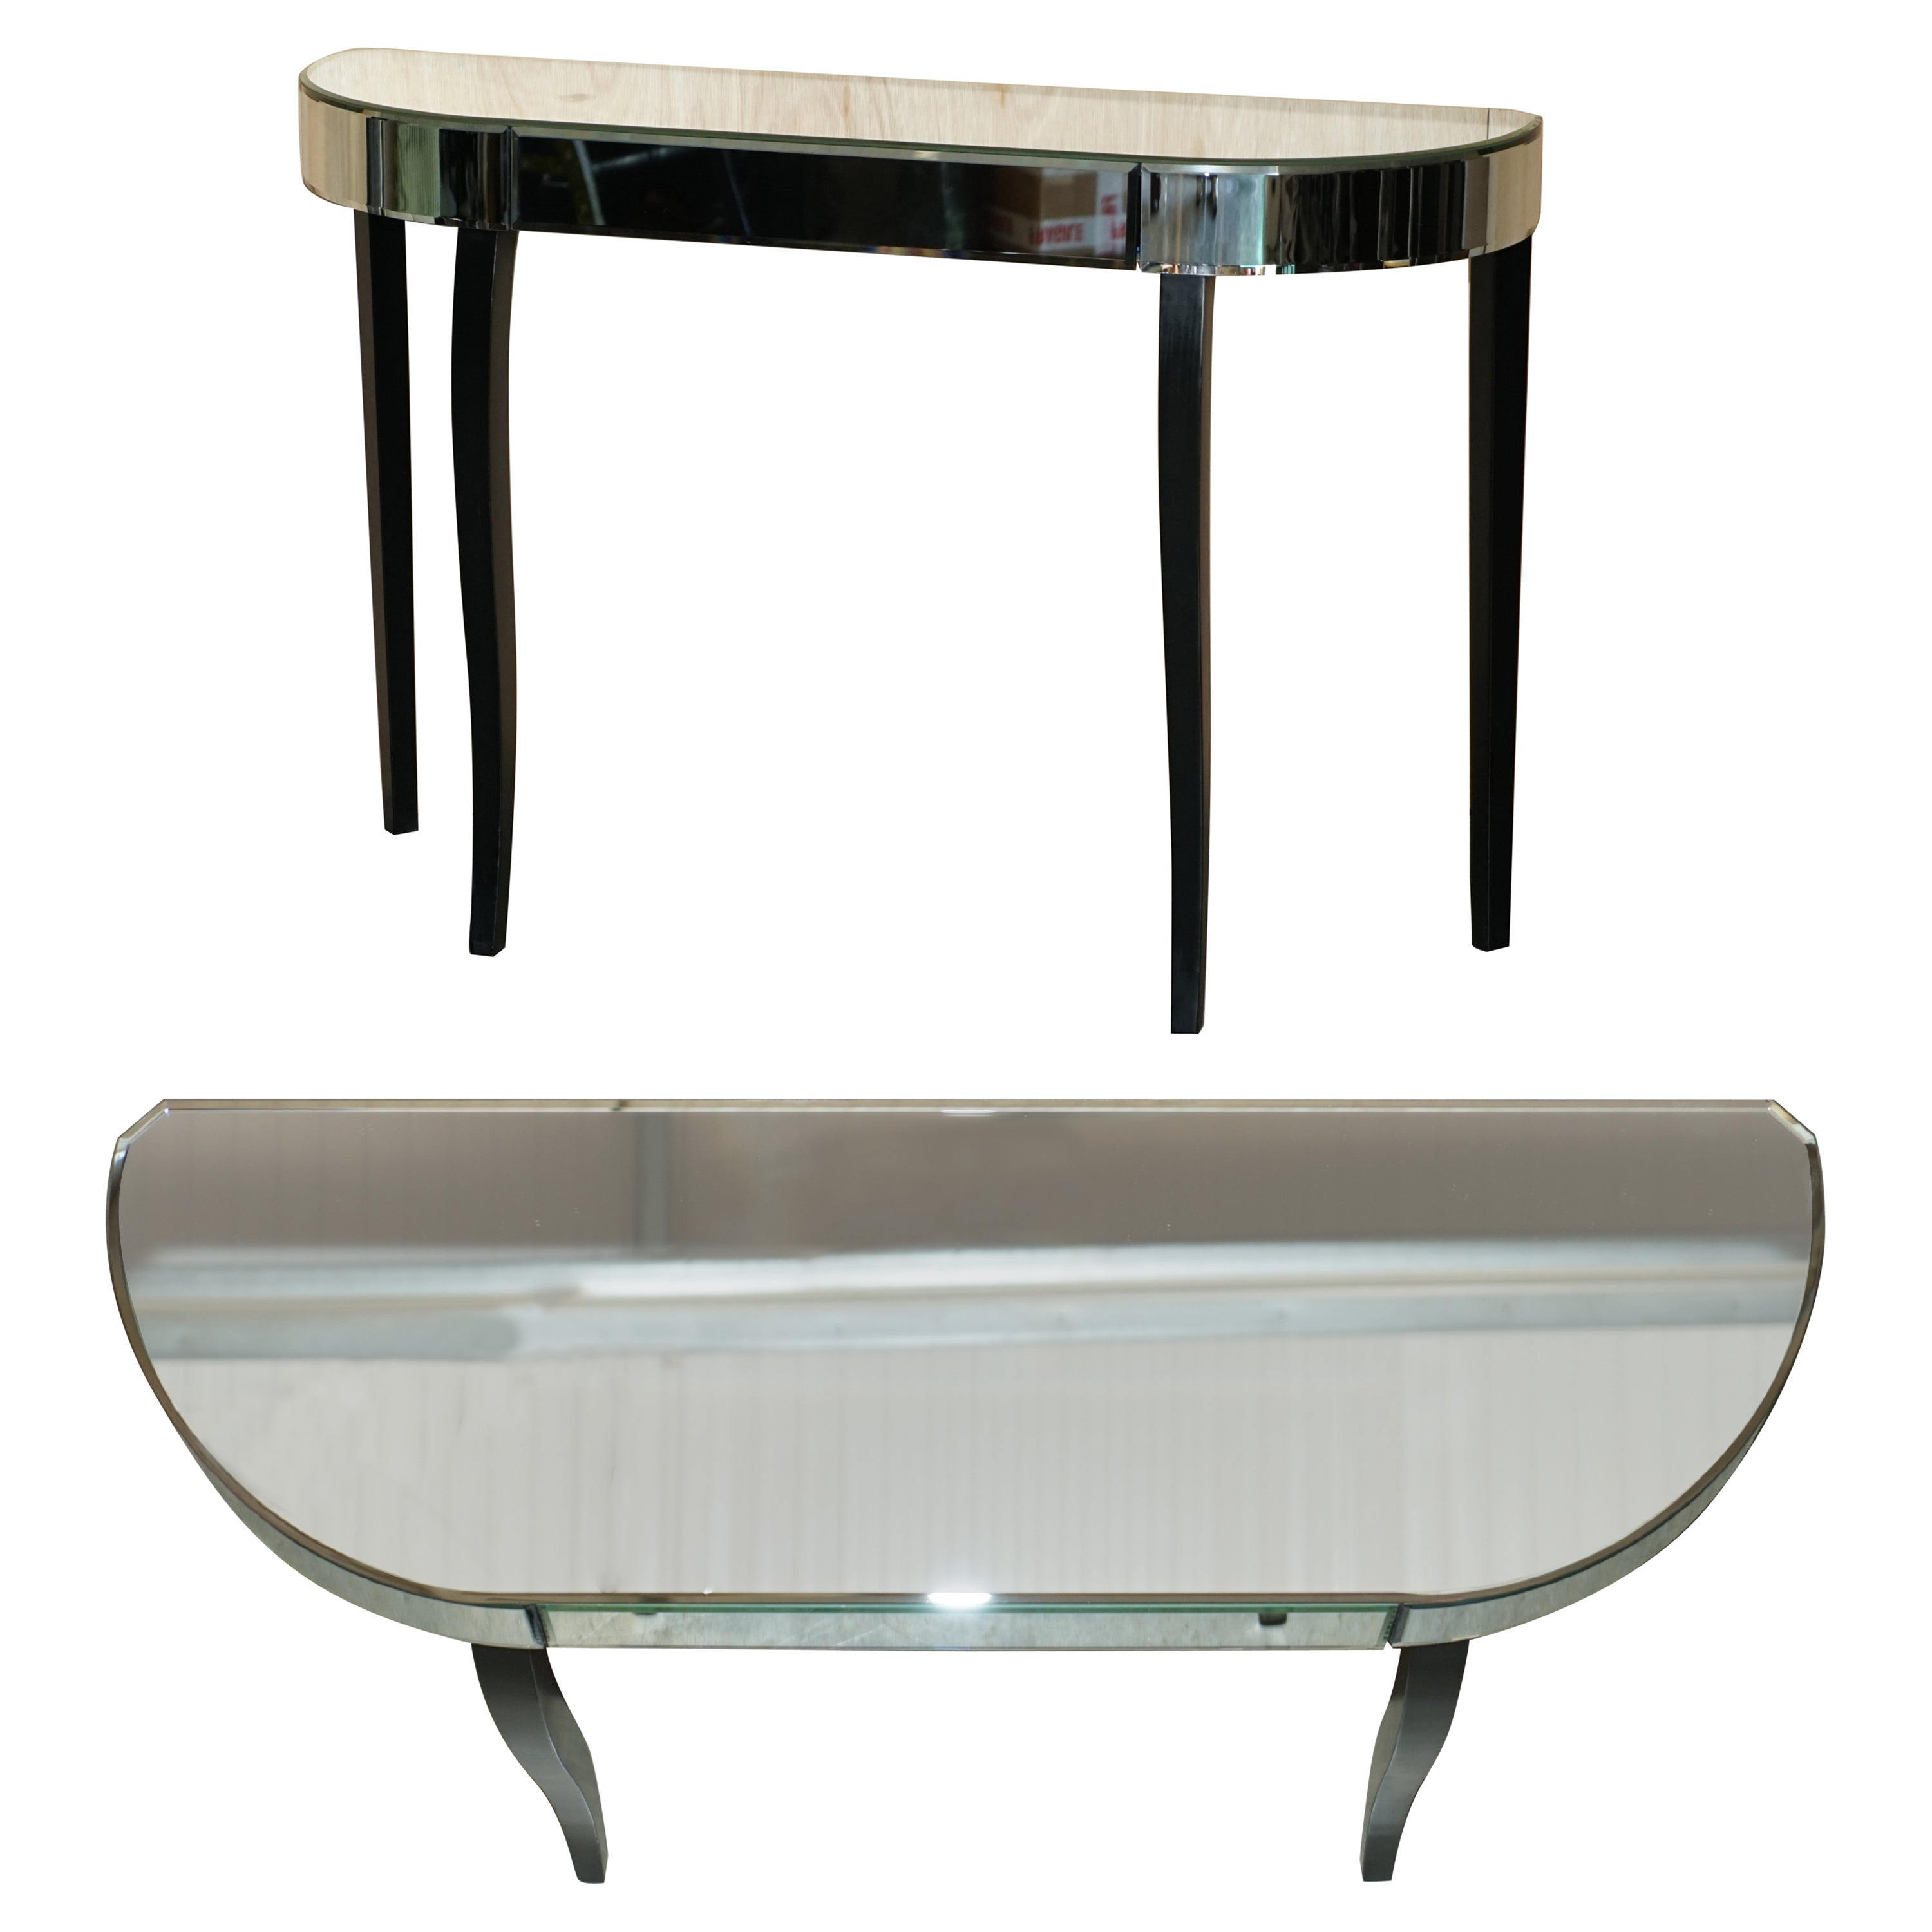 Mirrored Single Drawer Demilune Console Table Elegent Ebonized Lets Part of Set For Sale